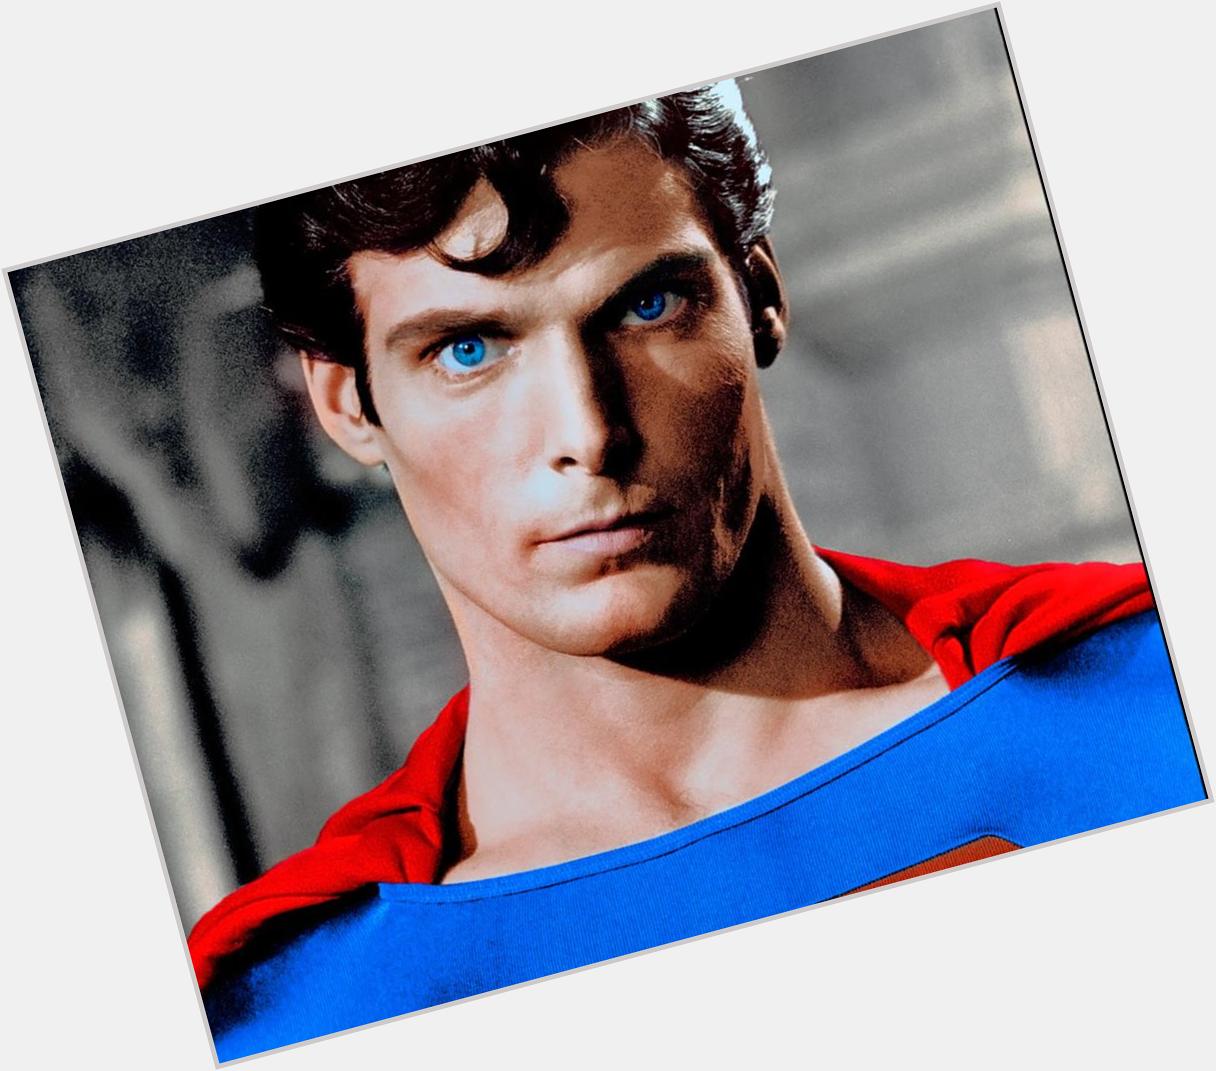 Happy Birthday to the late Christopher Reeve, who would have been 63 today. He will always be the greatest Superman. 